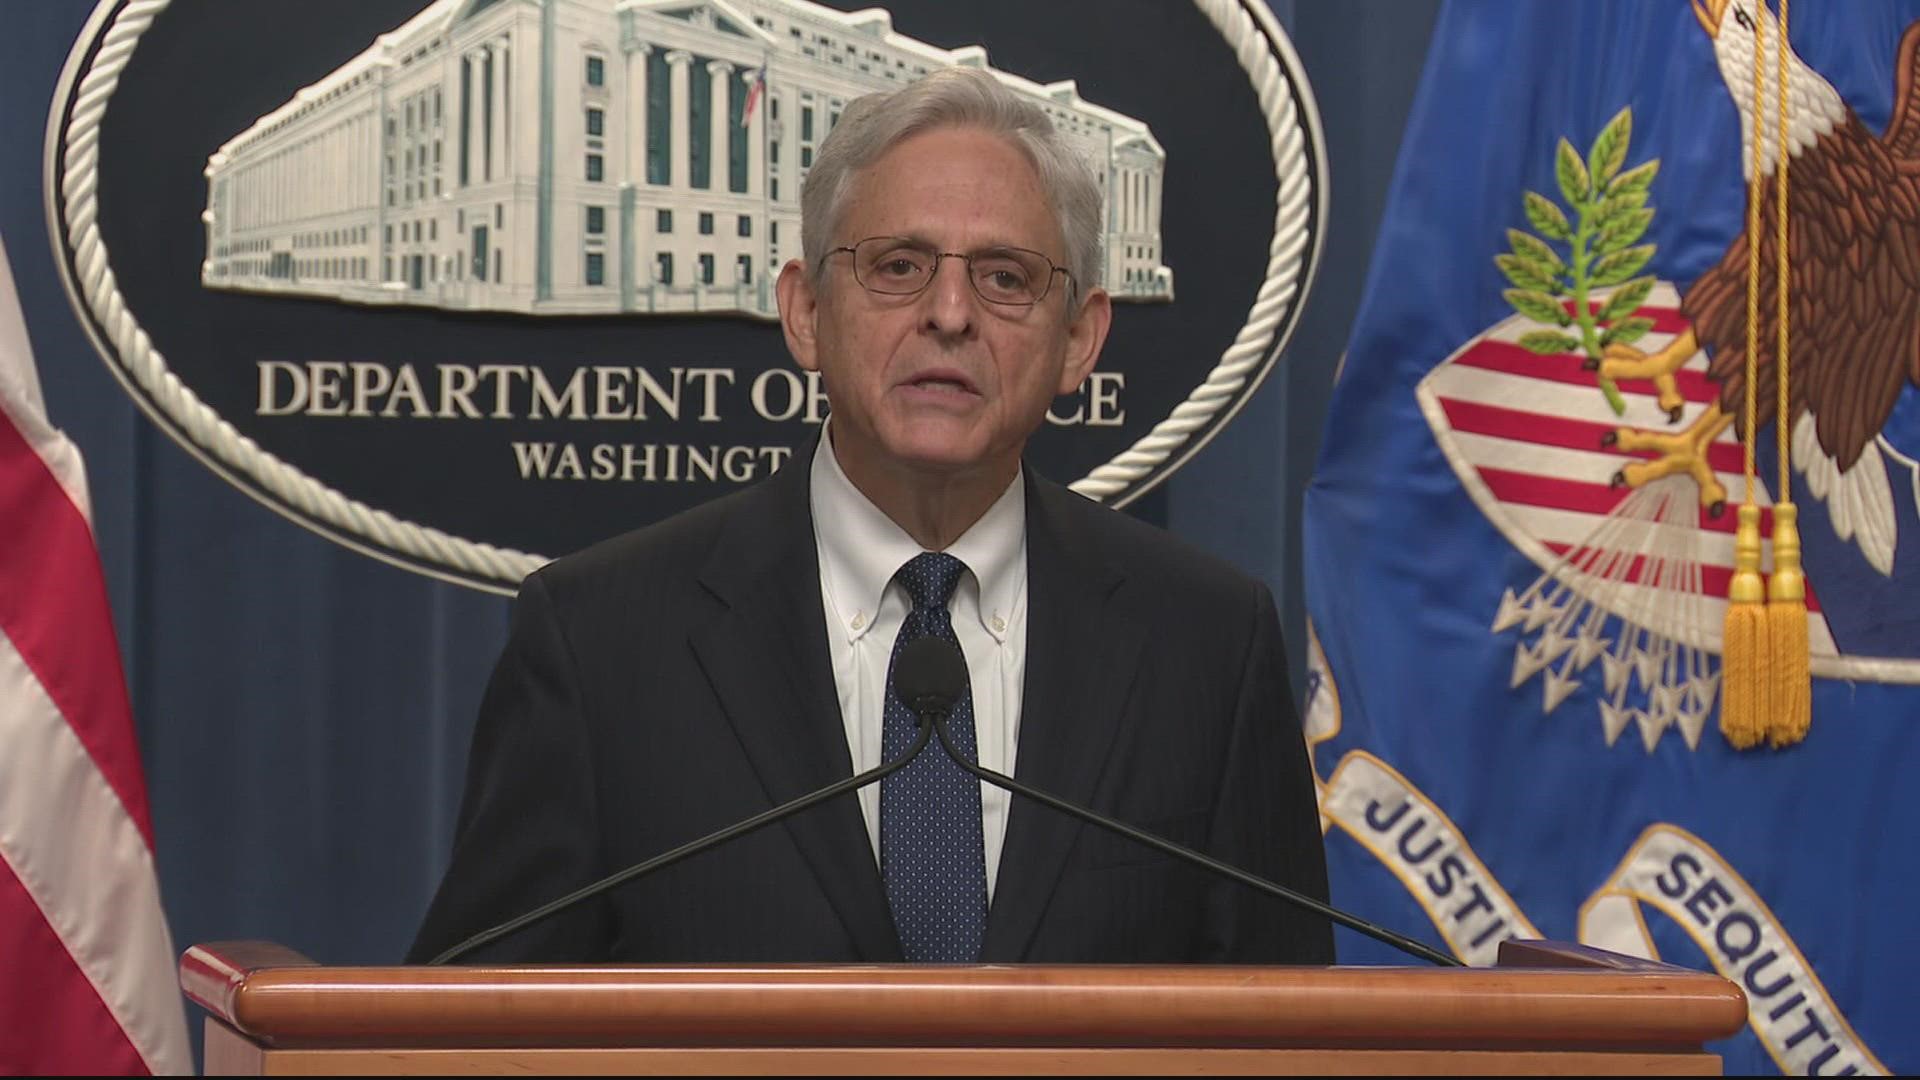 U.S. Attorney General Merrick Garland made a statement about the FBI search at Donald Trump’s Mar-a-Lago residence